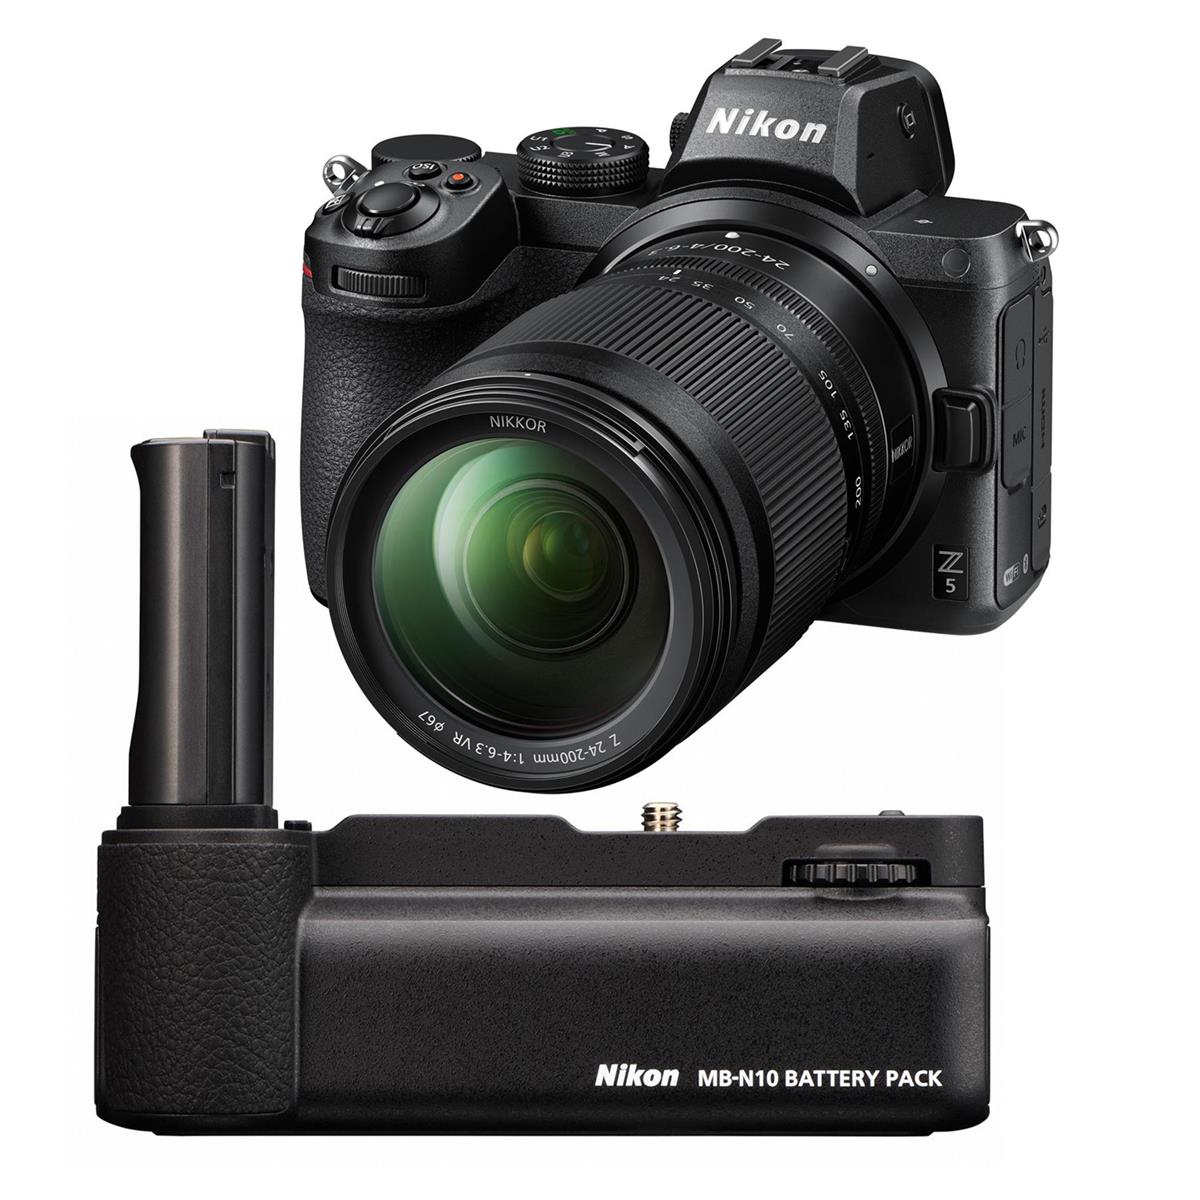 Image of Nikon Z5 Mirrorless Camera with 24-200mm Lens and MB-N10 Battery Pack